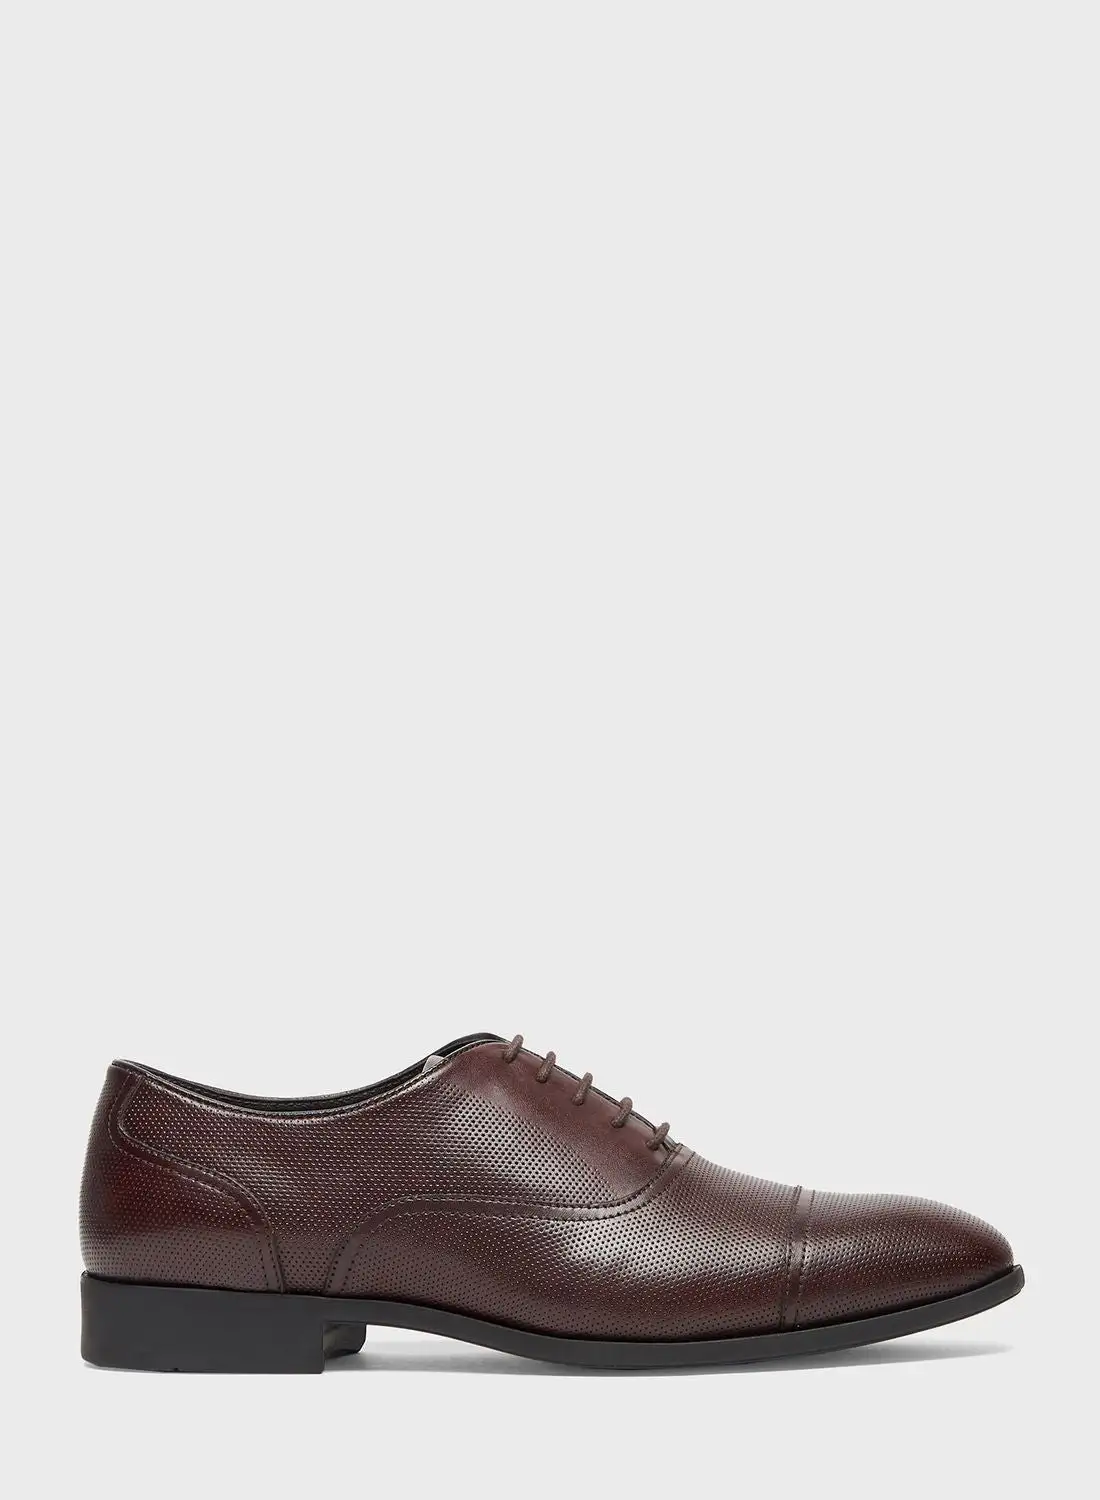 LBL by Shoexpress Formal Lace Up Shoes